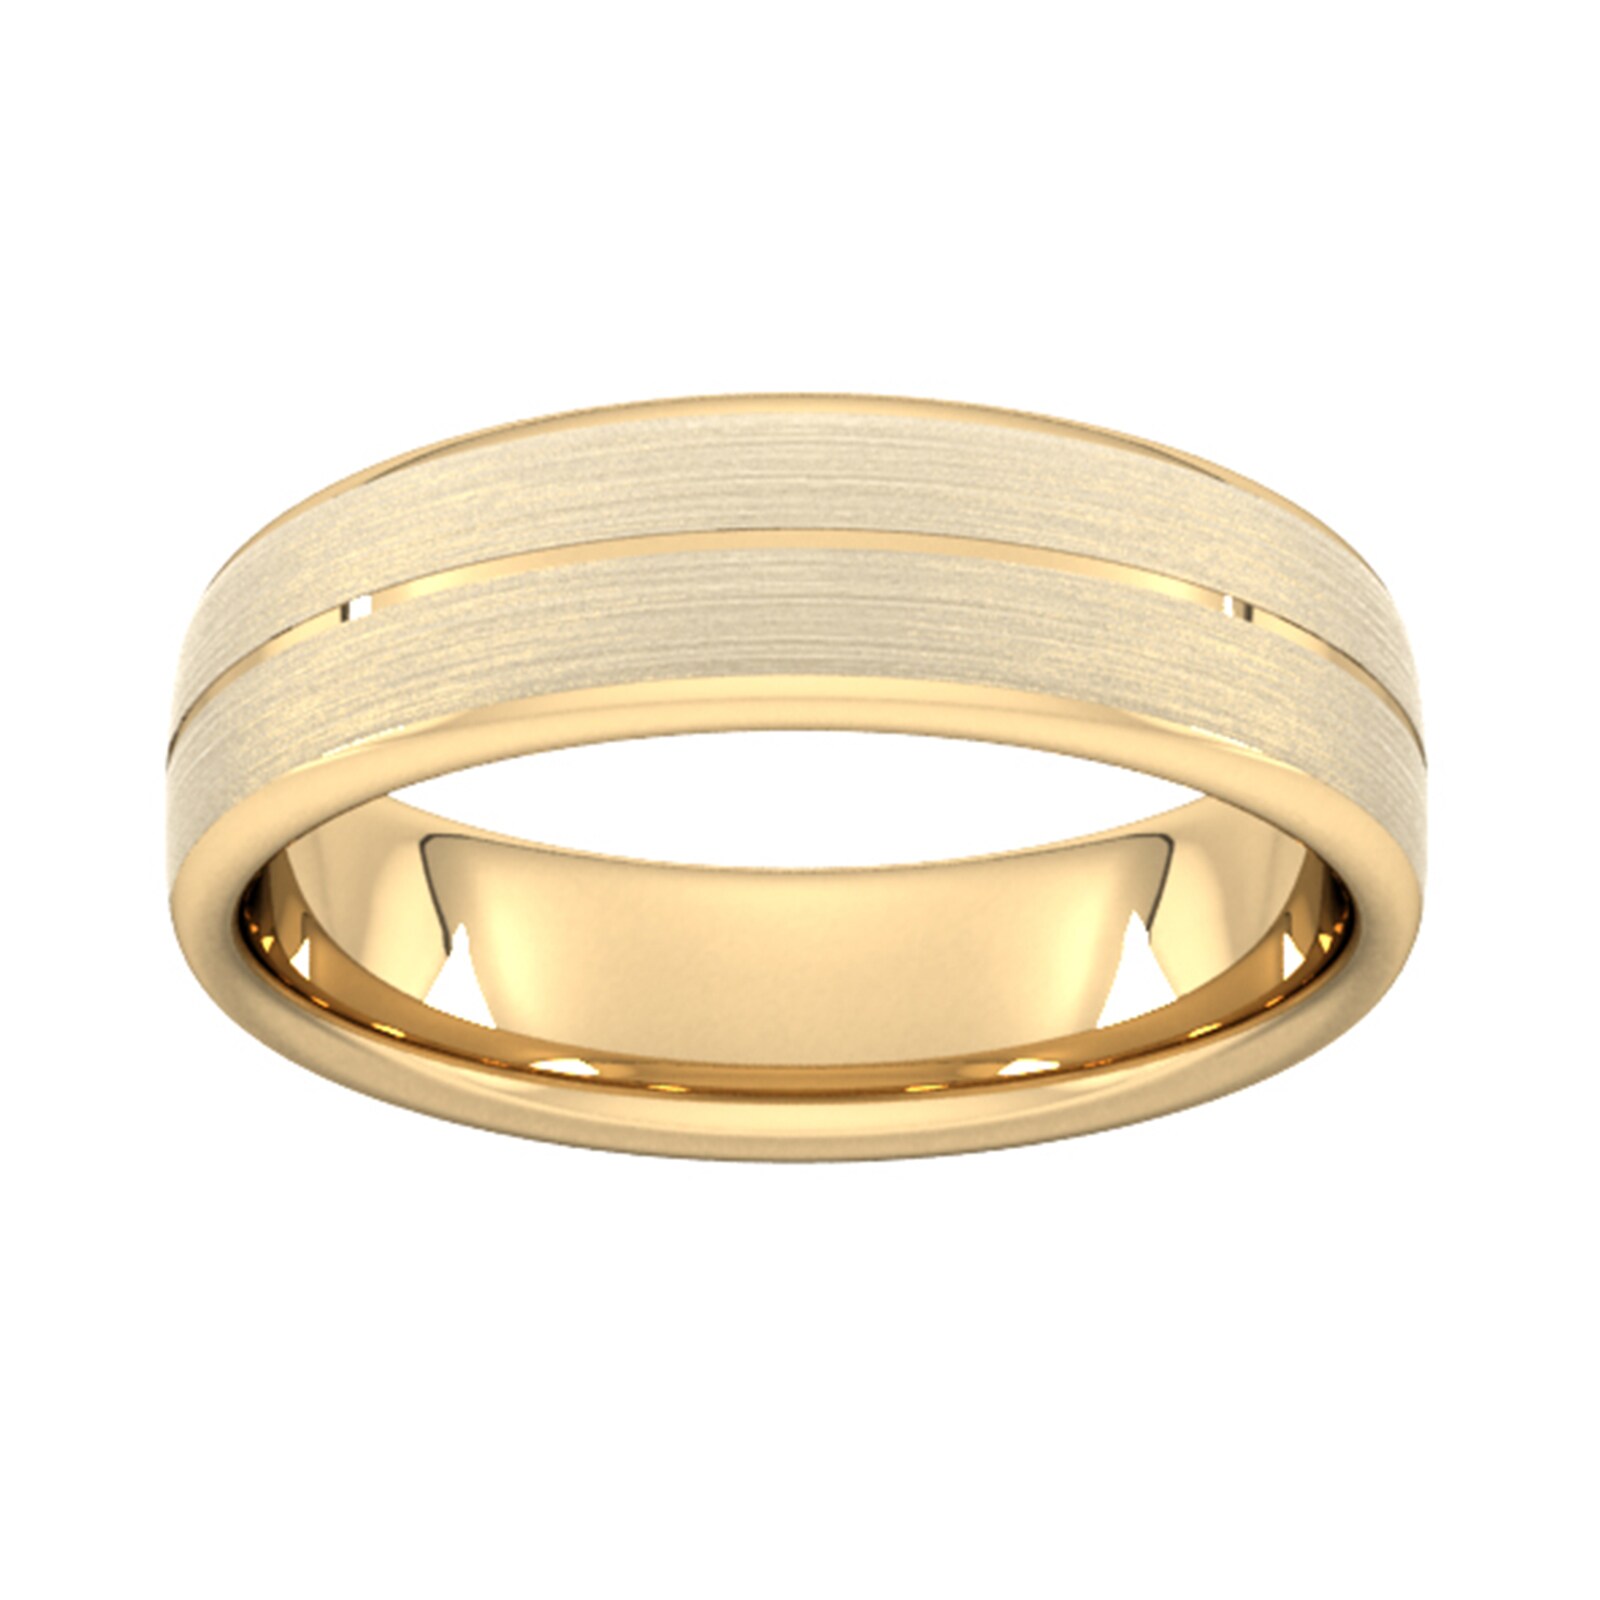 6mm D Shape Heavy Centre Groove With Chamfered Edge Wedding Ring In 18 Carat Yellow Gold - Ring Size W